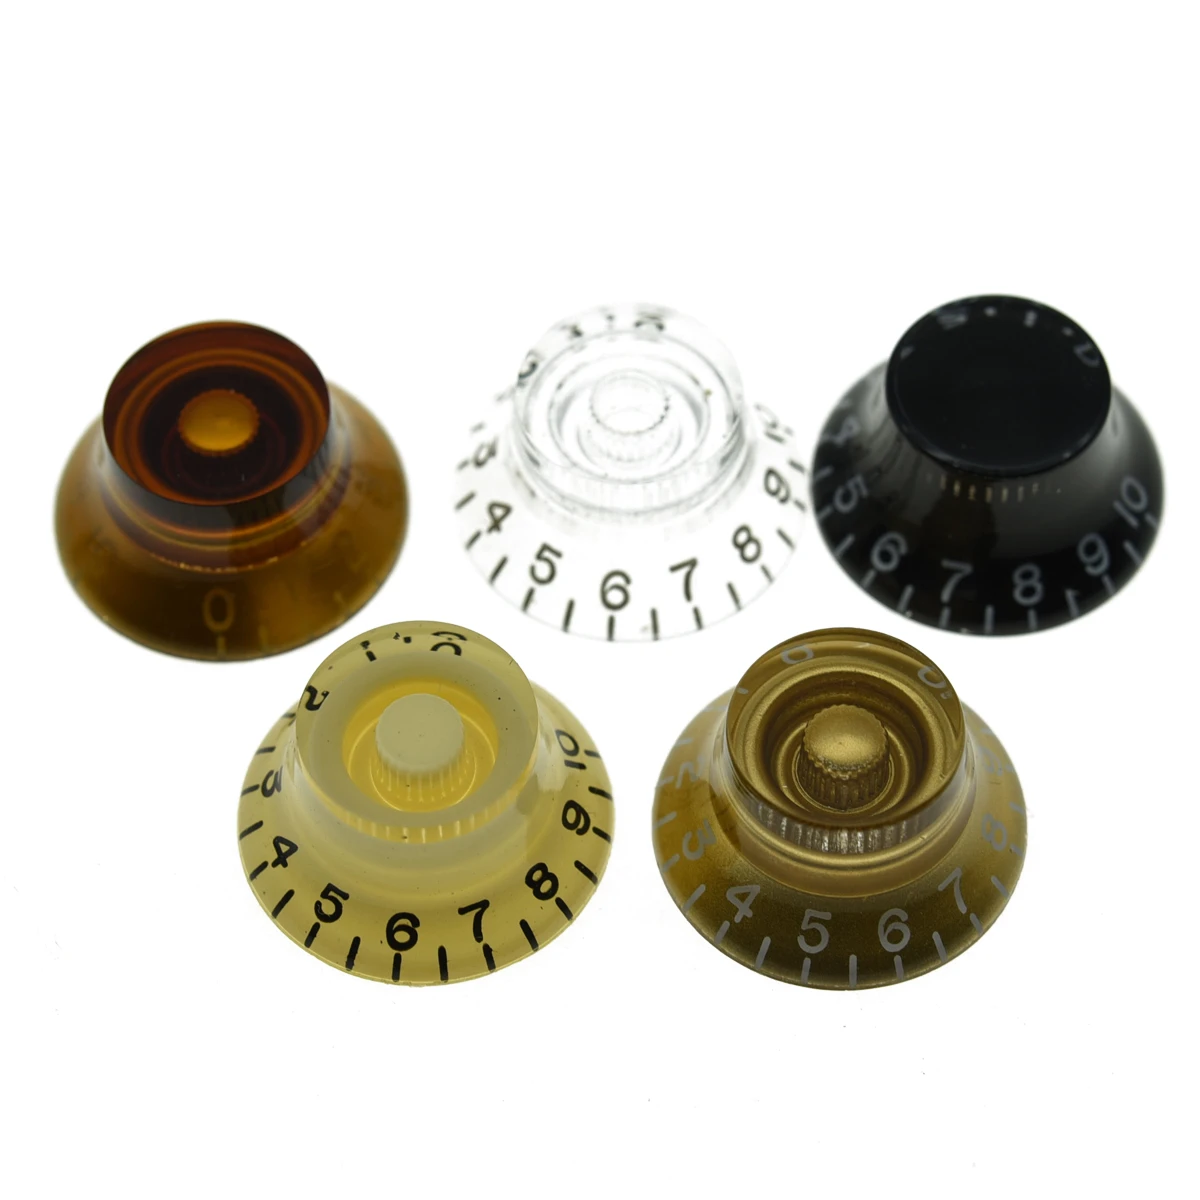 KAISH USA/Imperial Spec LP Guitar Bell Knobs 24 Fine Top Hat Knobs for Gibson Les Pauls or CTS Pots|Guitar Parts & Accessories| - AliExpress